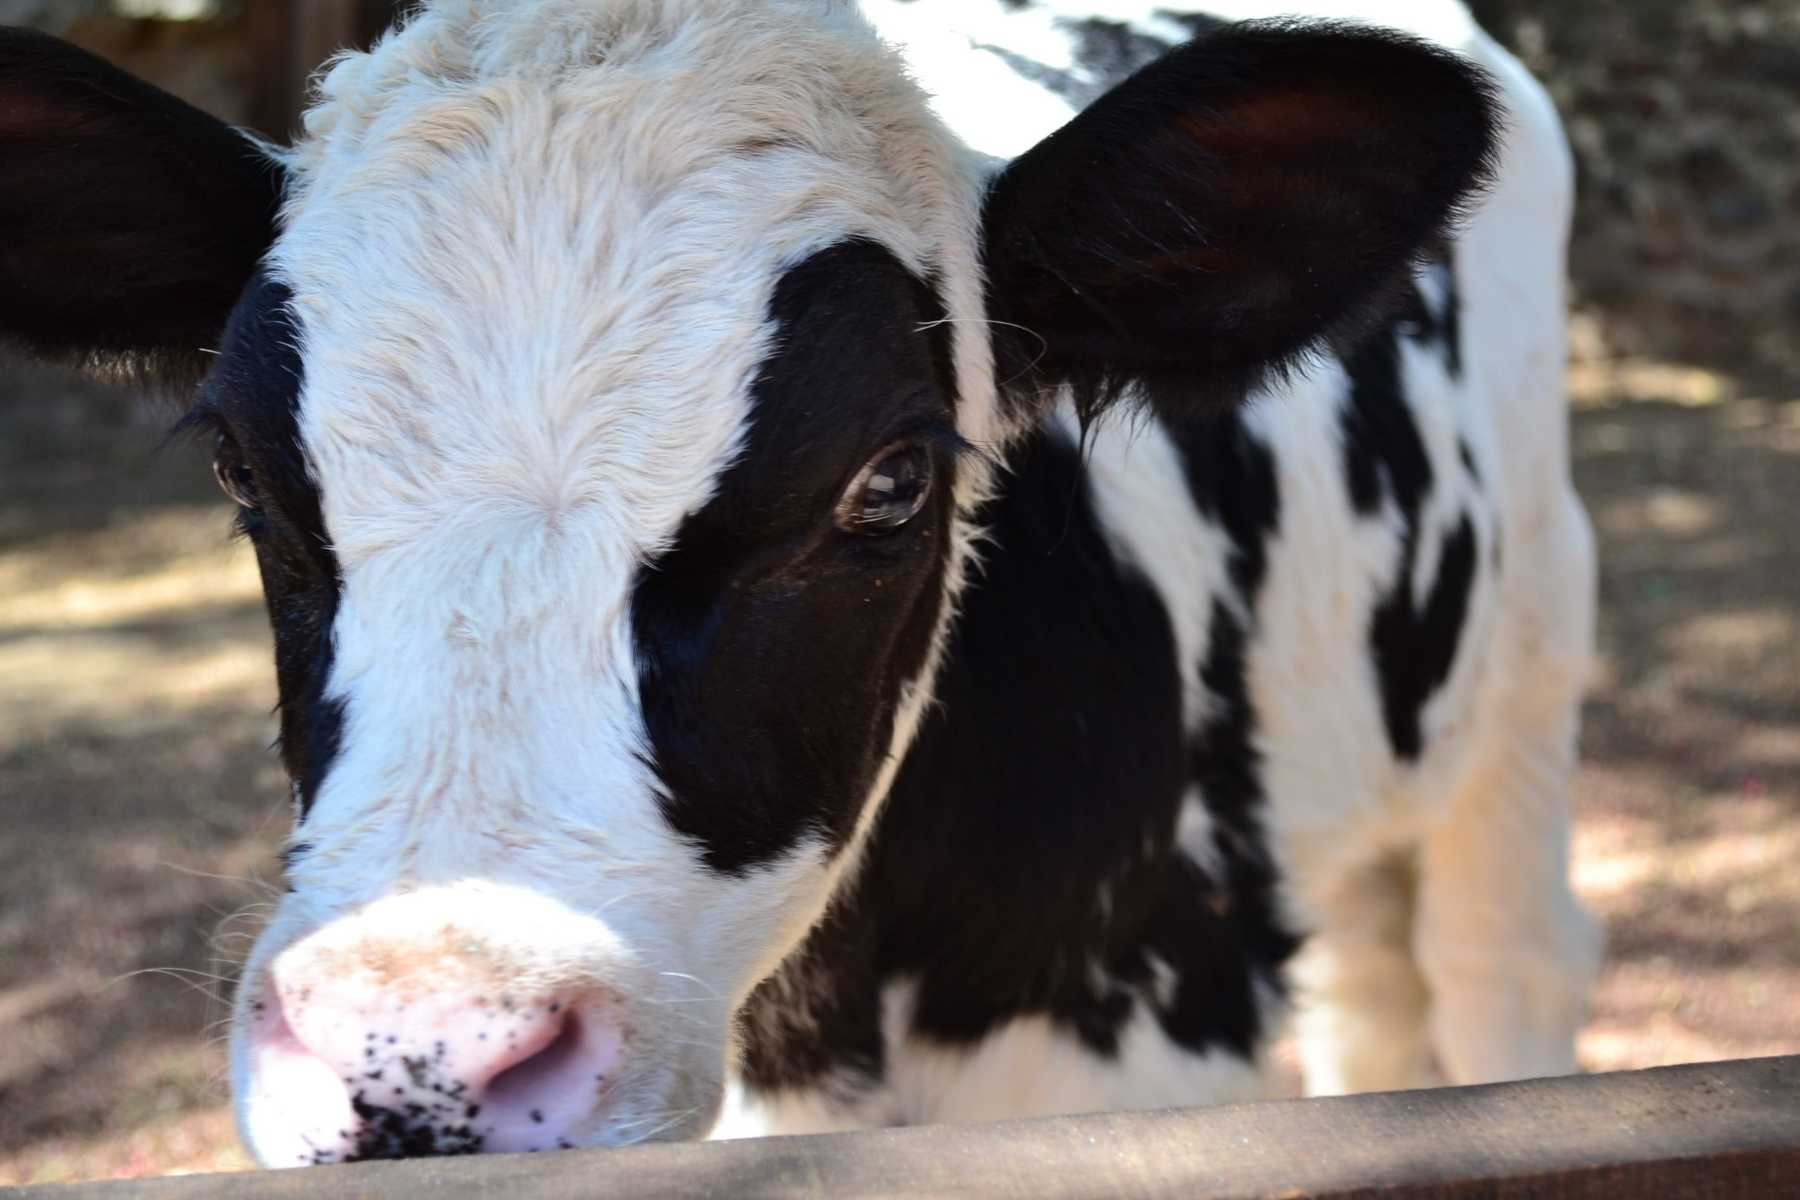 What Is Veal Meat, Where Does It Come From & Why Is It Cruel? - GenV